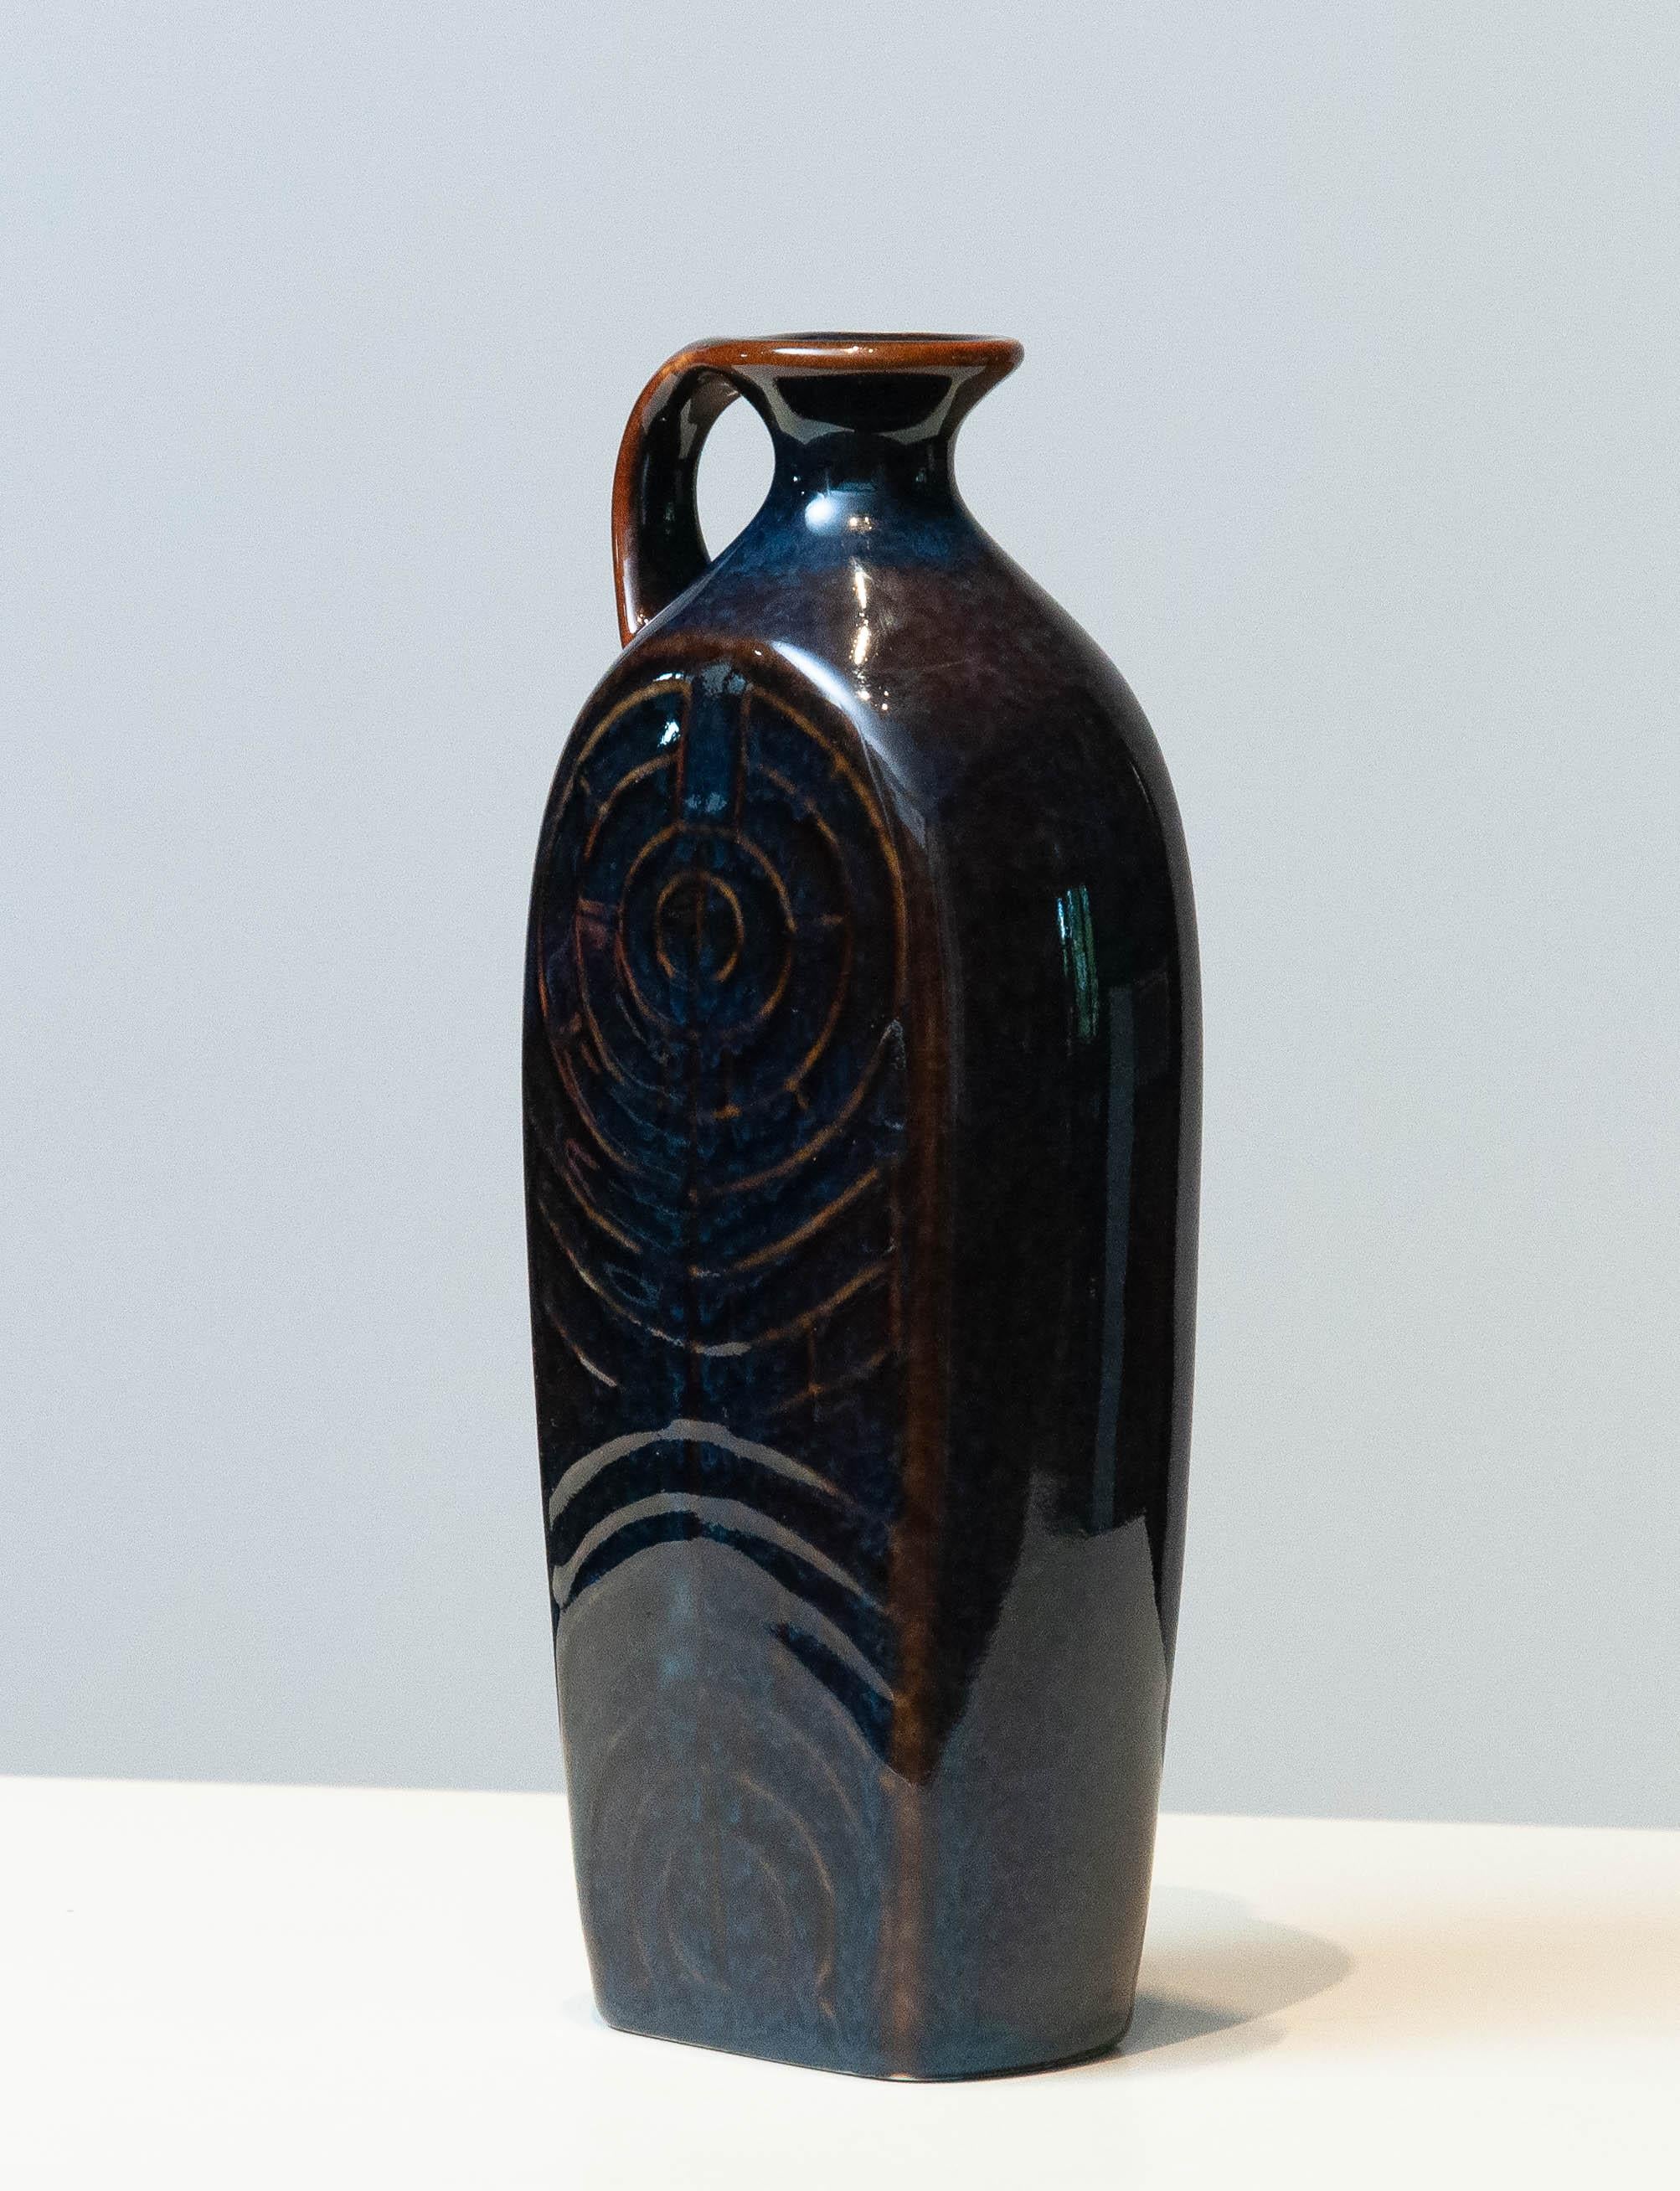 Fantastic glazed pitcher / vase made by Carl-Harry Stålhane for Rörstrand Sweden in the 1950's. The extremely beautiful combination of blue and brown colors mixed glazed and the slim design makes this pitcher iconic and examples for the best design